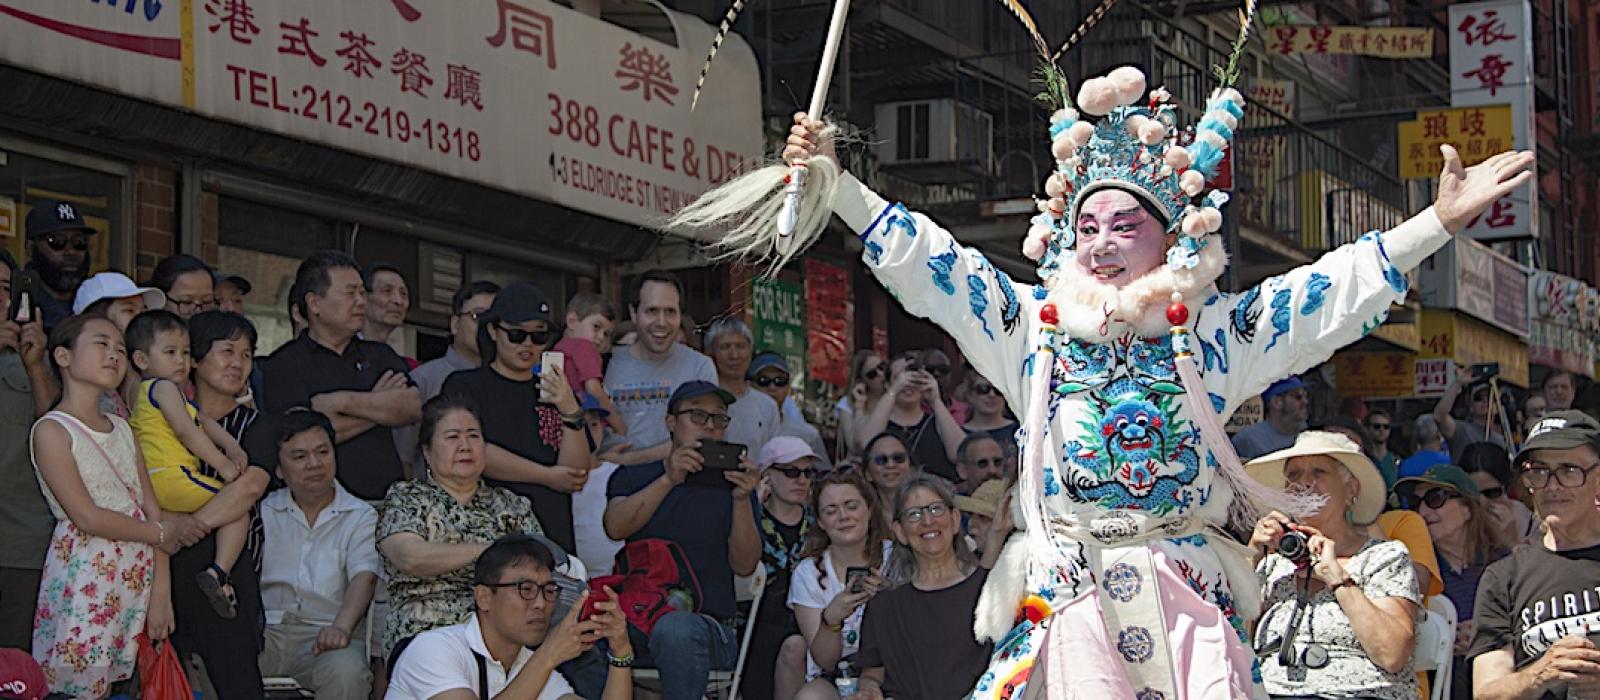 Elaborately costumed figure in parading down a city street surrounded by a large crowd